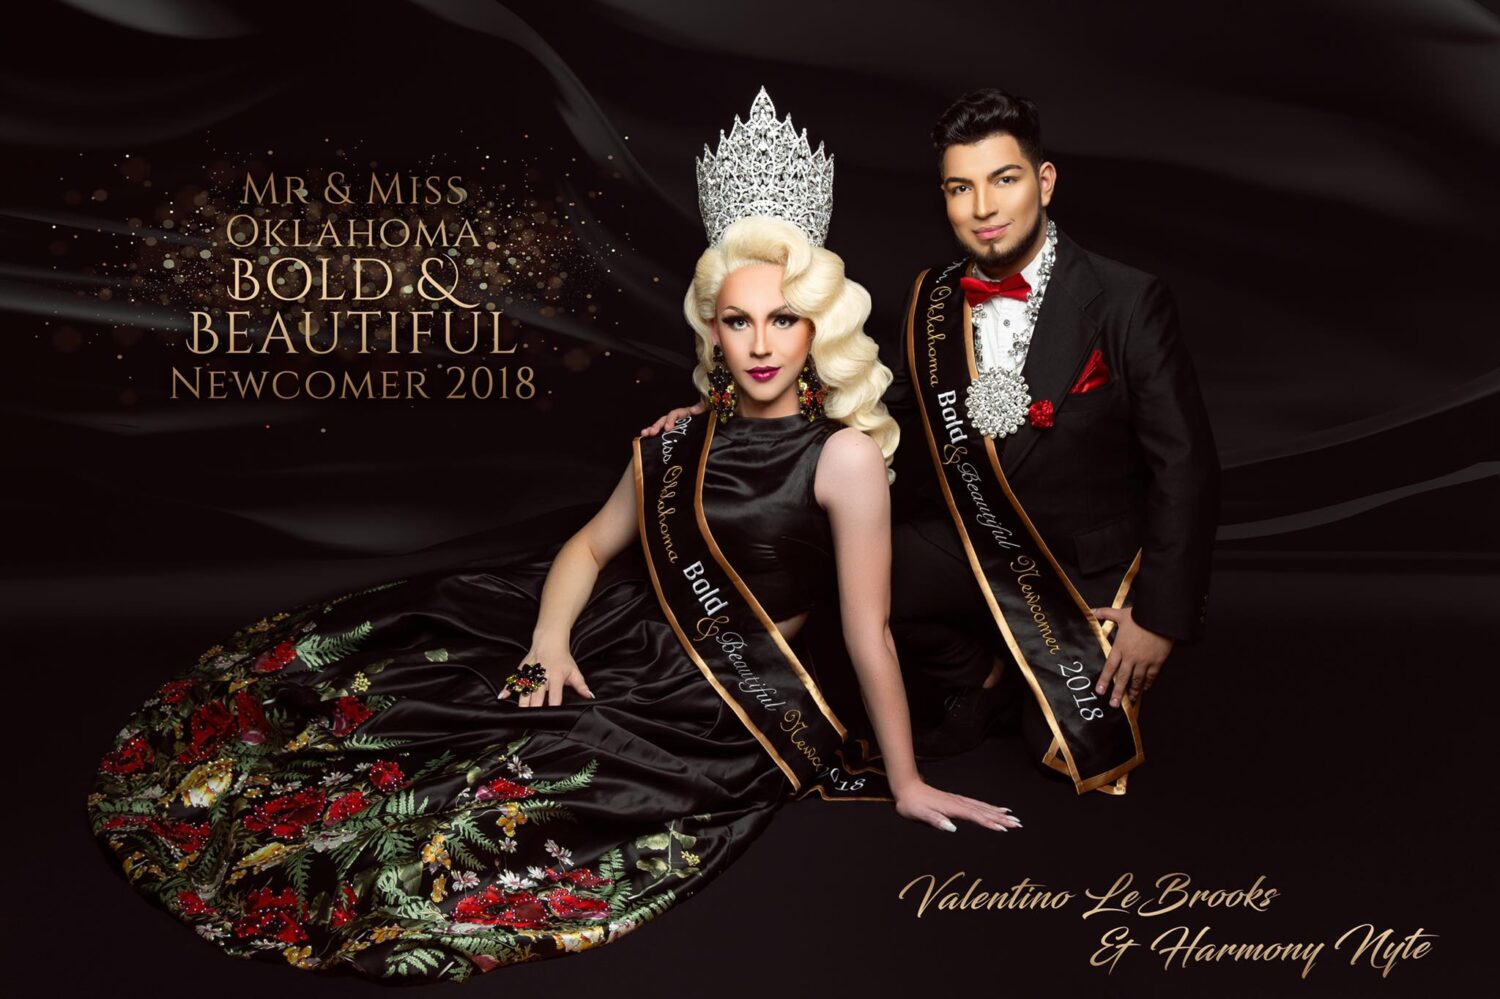 Harmony Nyte and Valentino Le Brooks | Promotional Photo for Mr. and Miss Oklahoma Bold & Beautiful Newcomer 2018